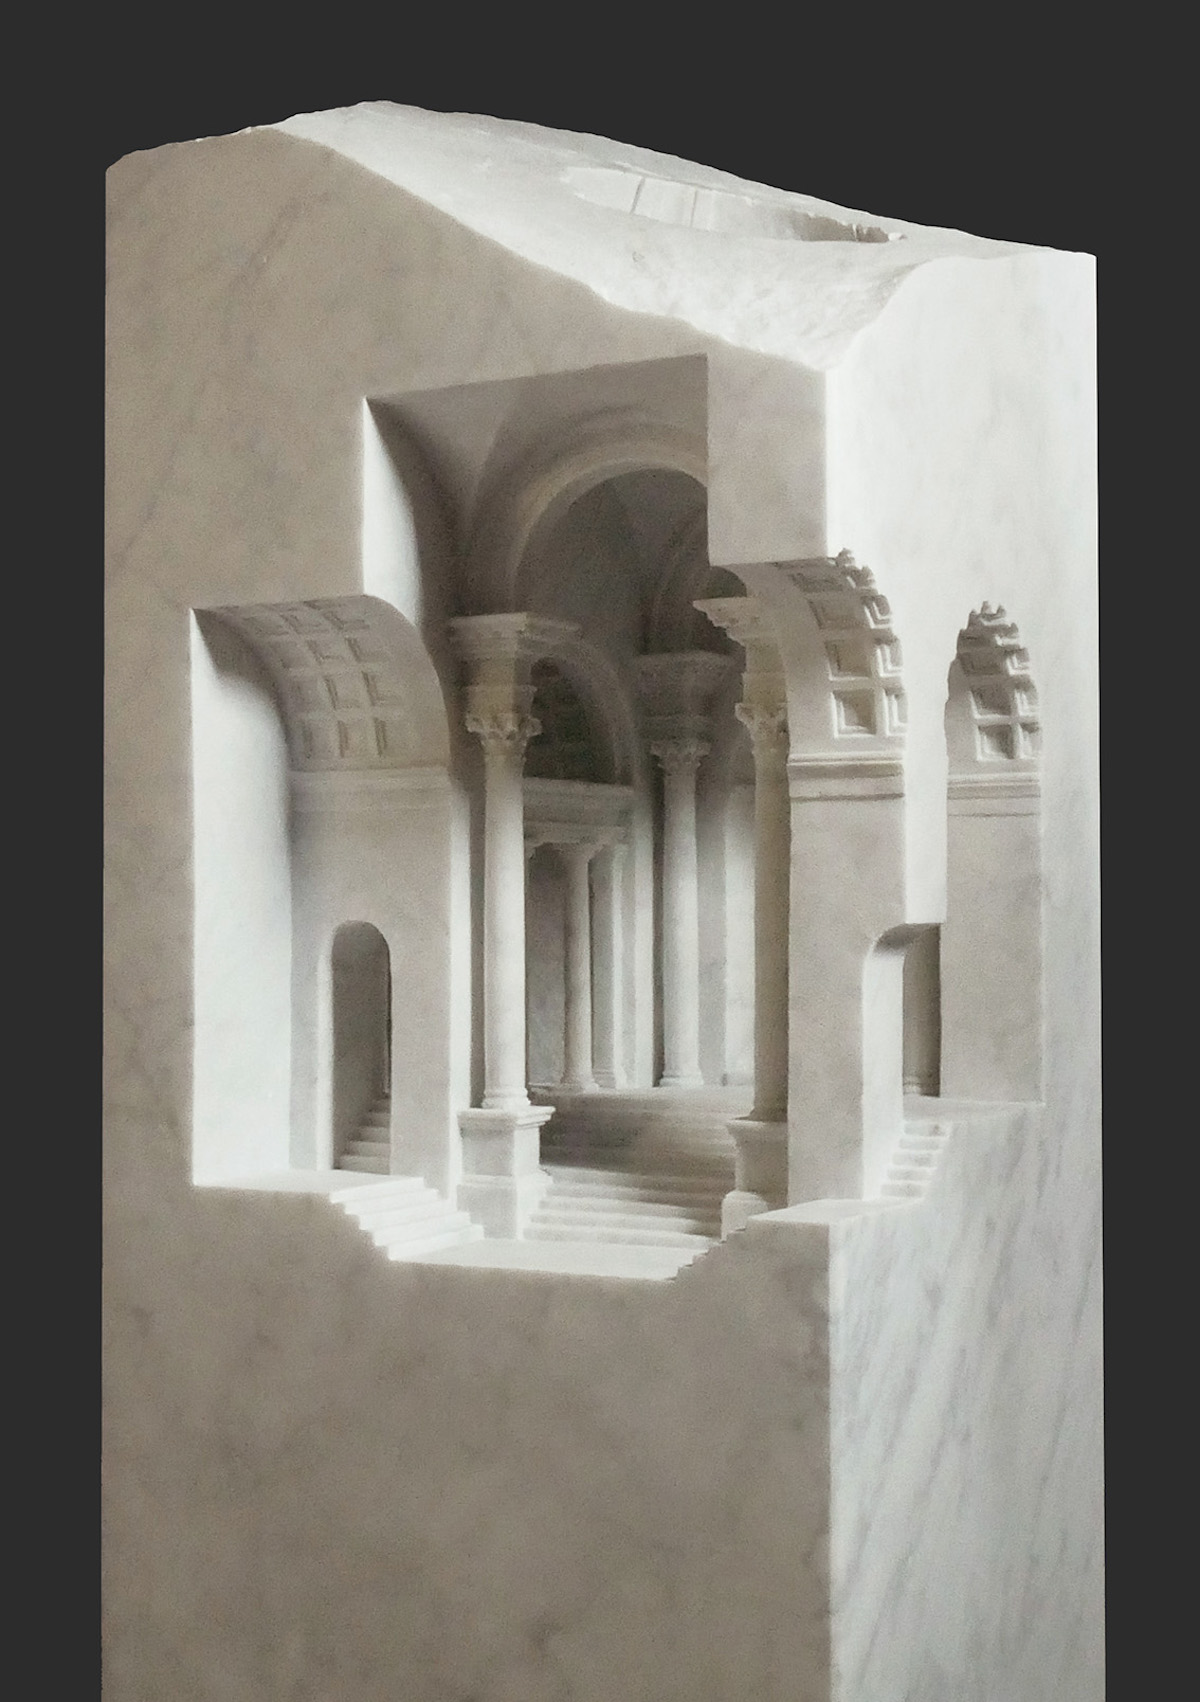 Architectural Carving by Matthew Simonds